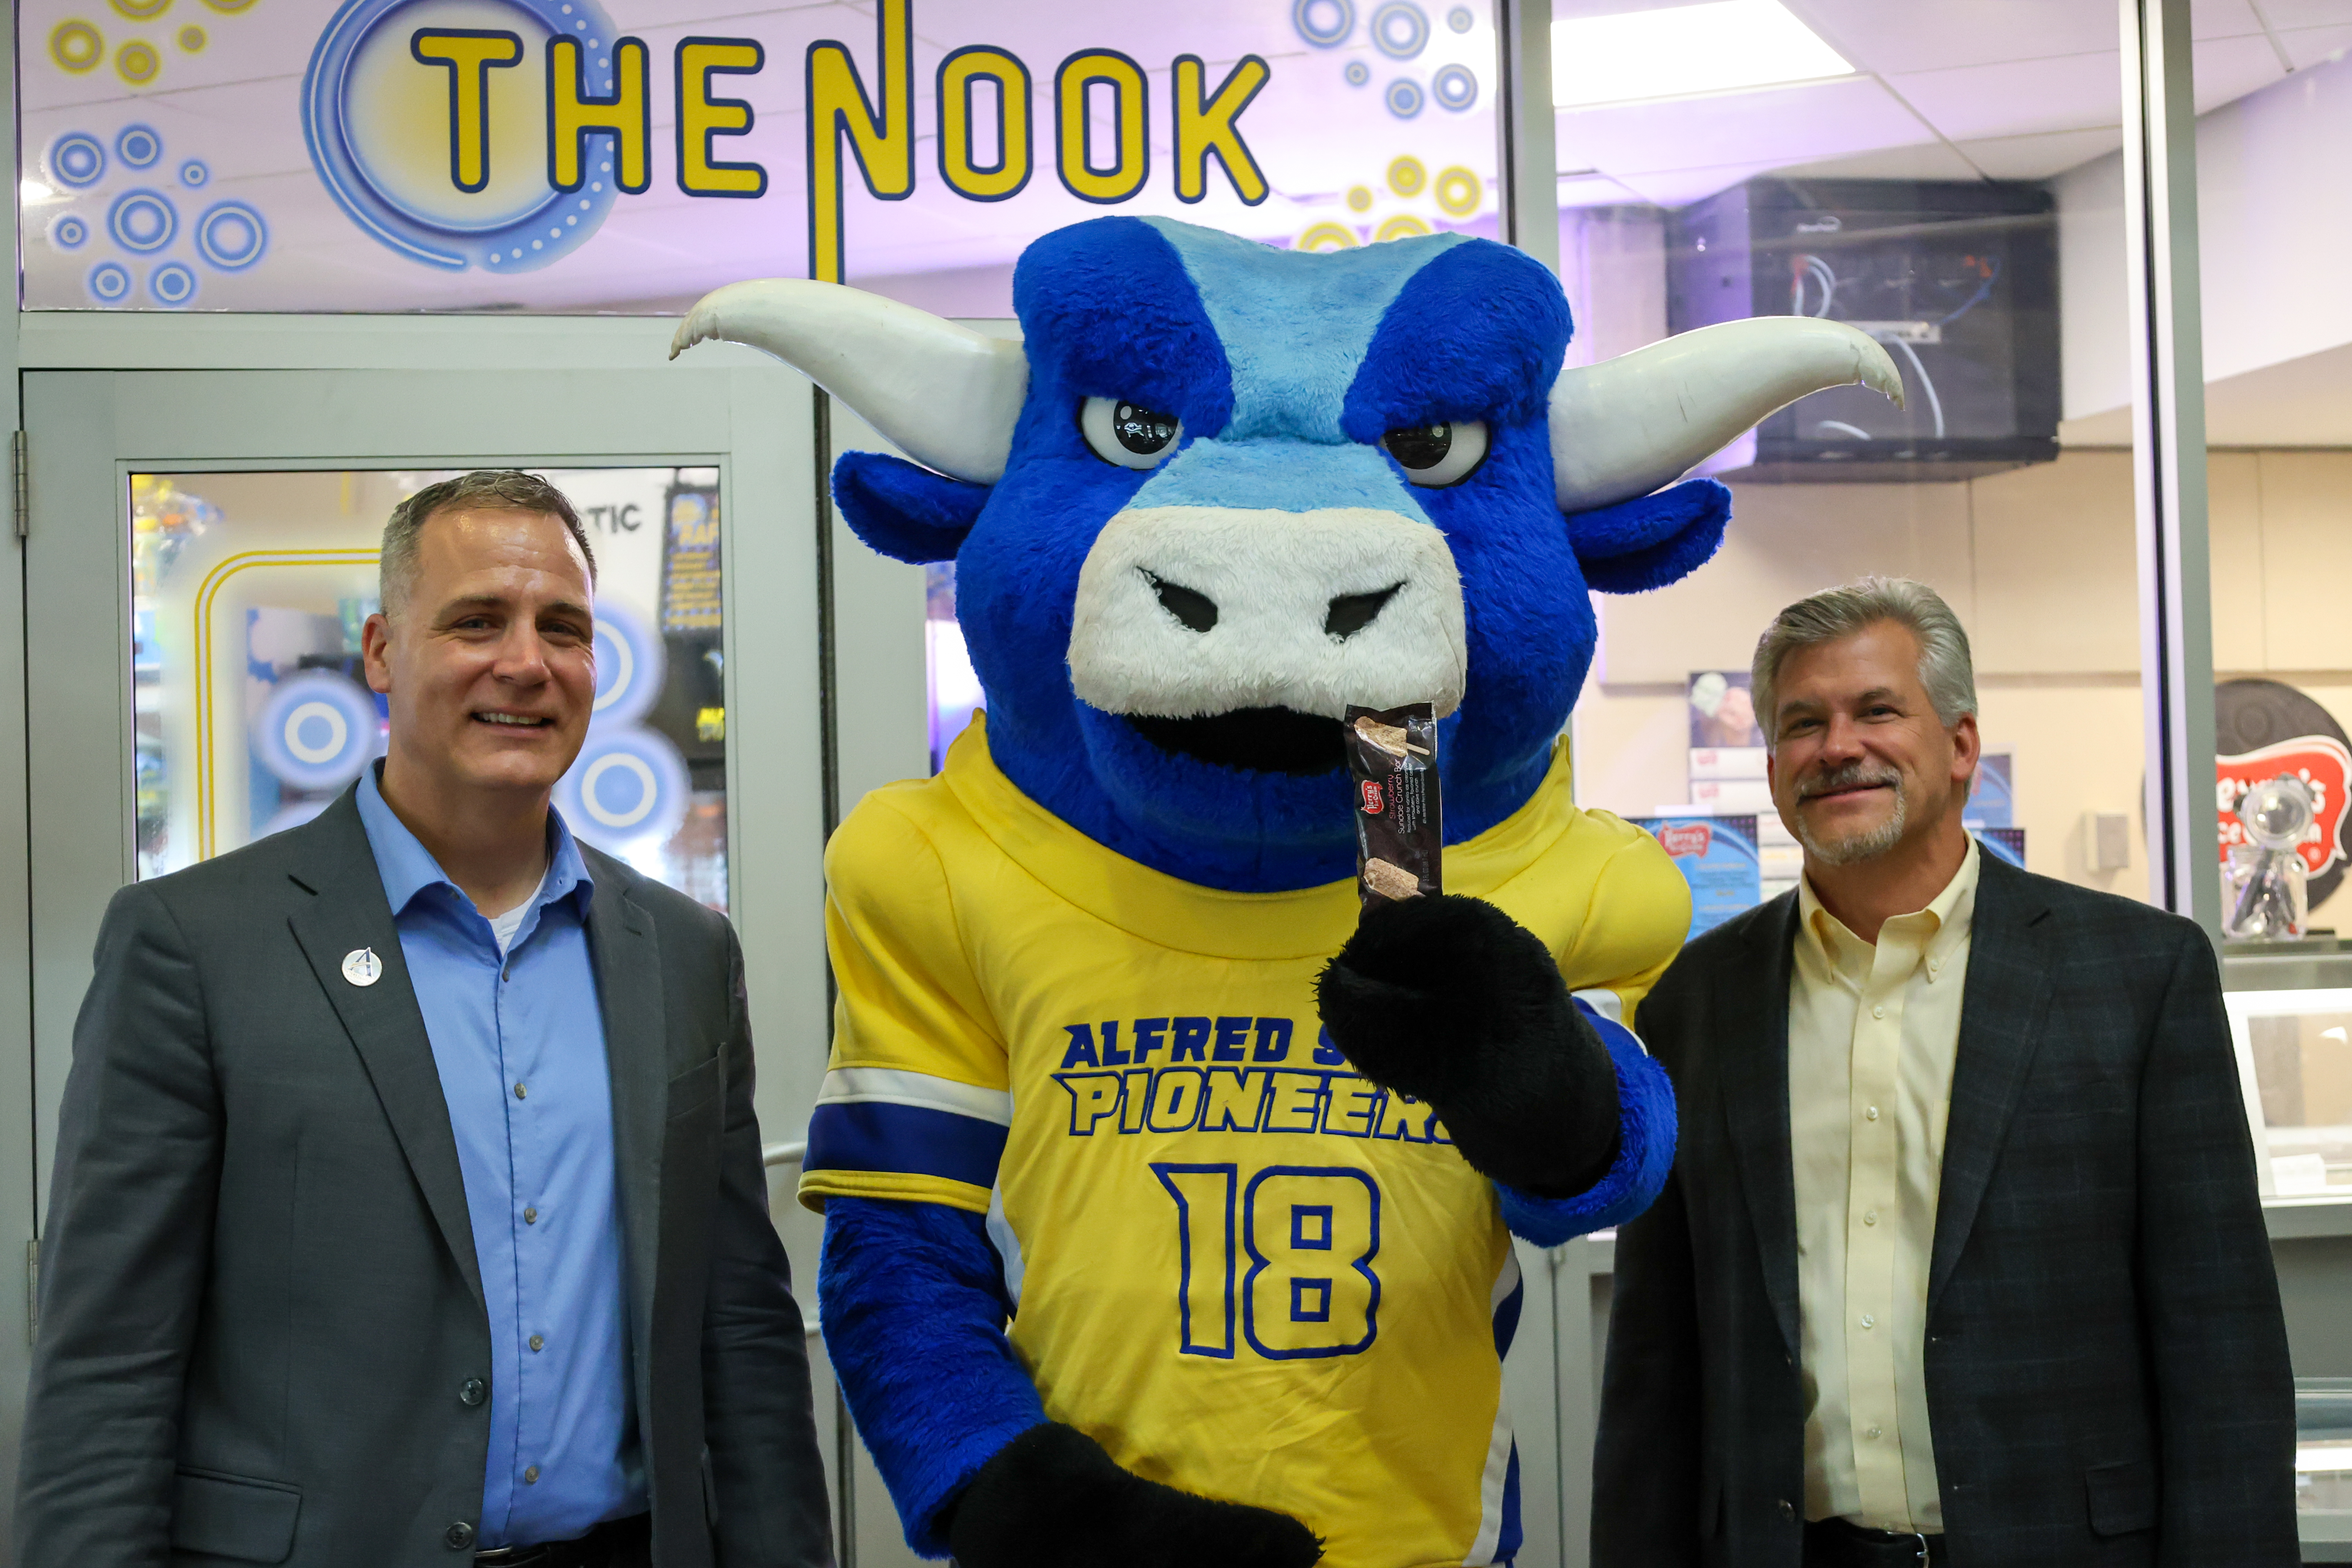 Dr. Mauro, Big Blue, and Brian Perry outside "The Nook"